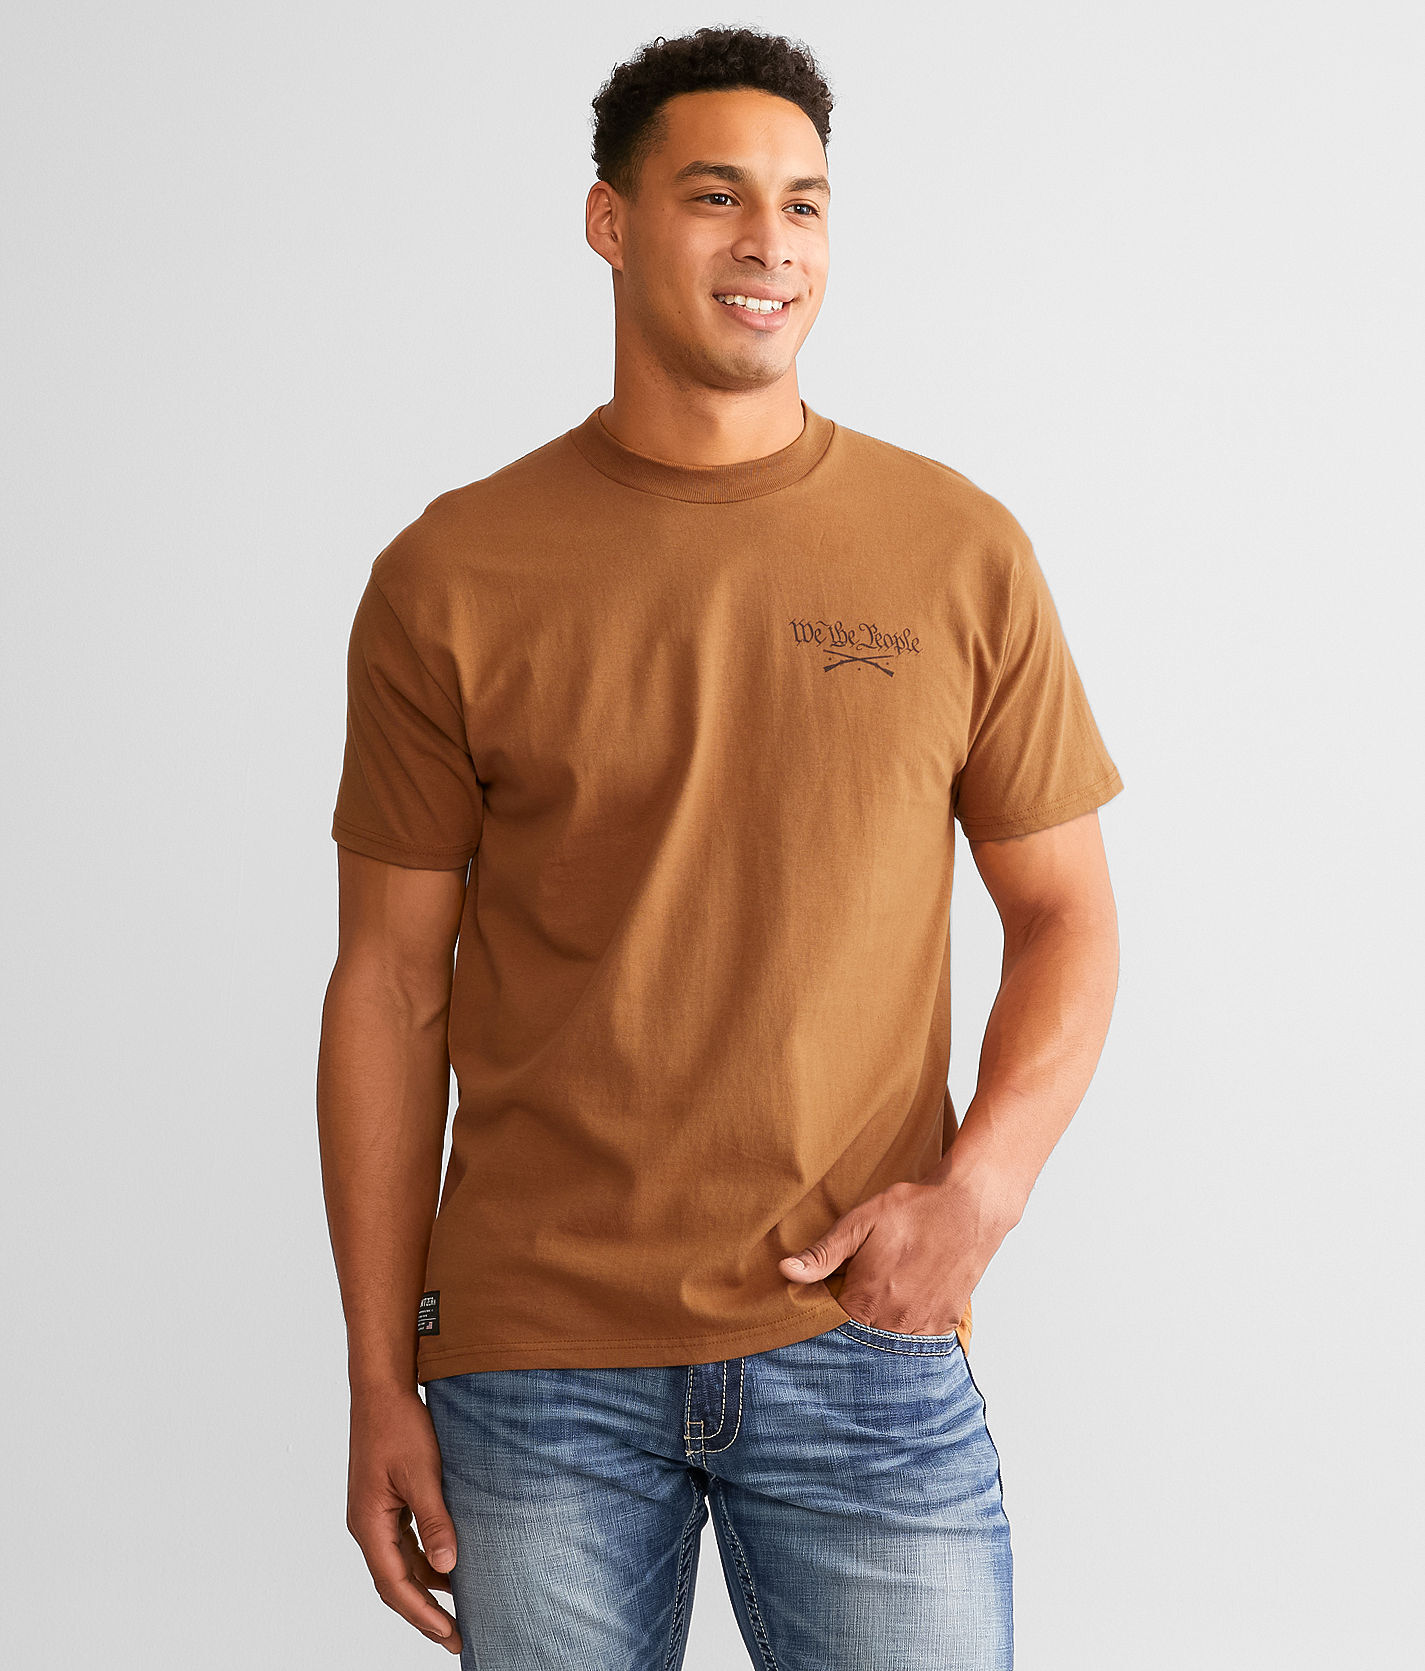 Howitzer We The People T-Shirt  - Brown - male - Size: 2L